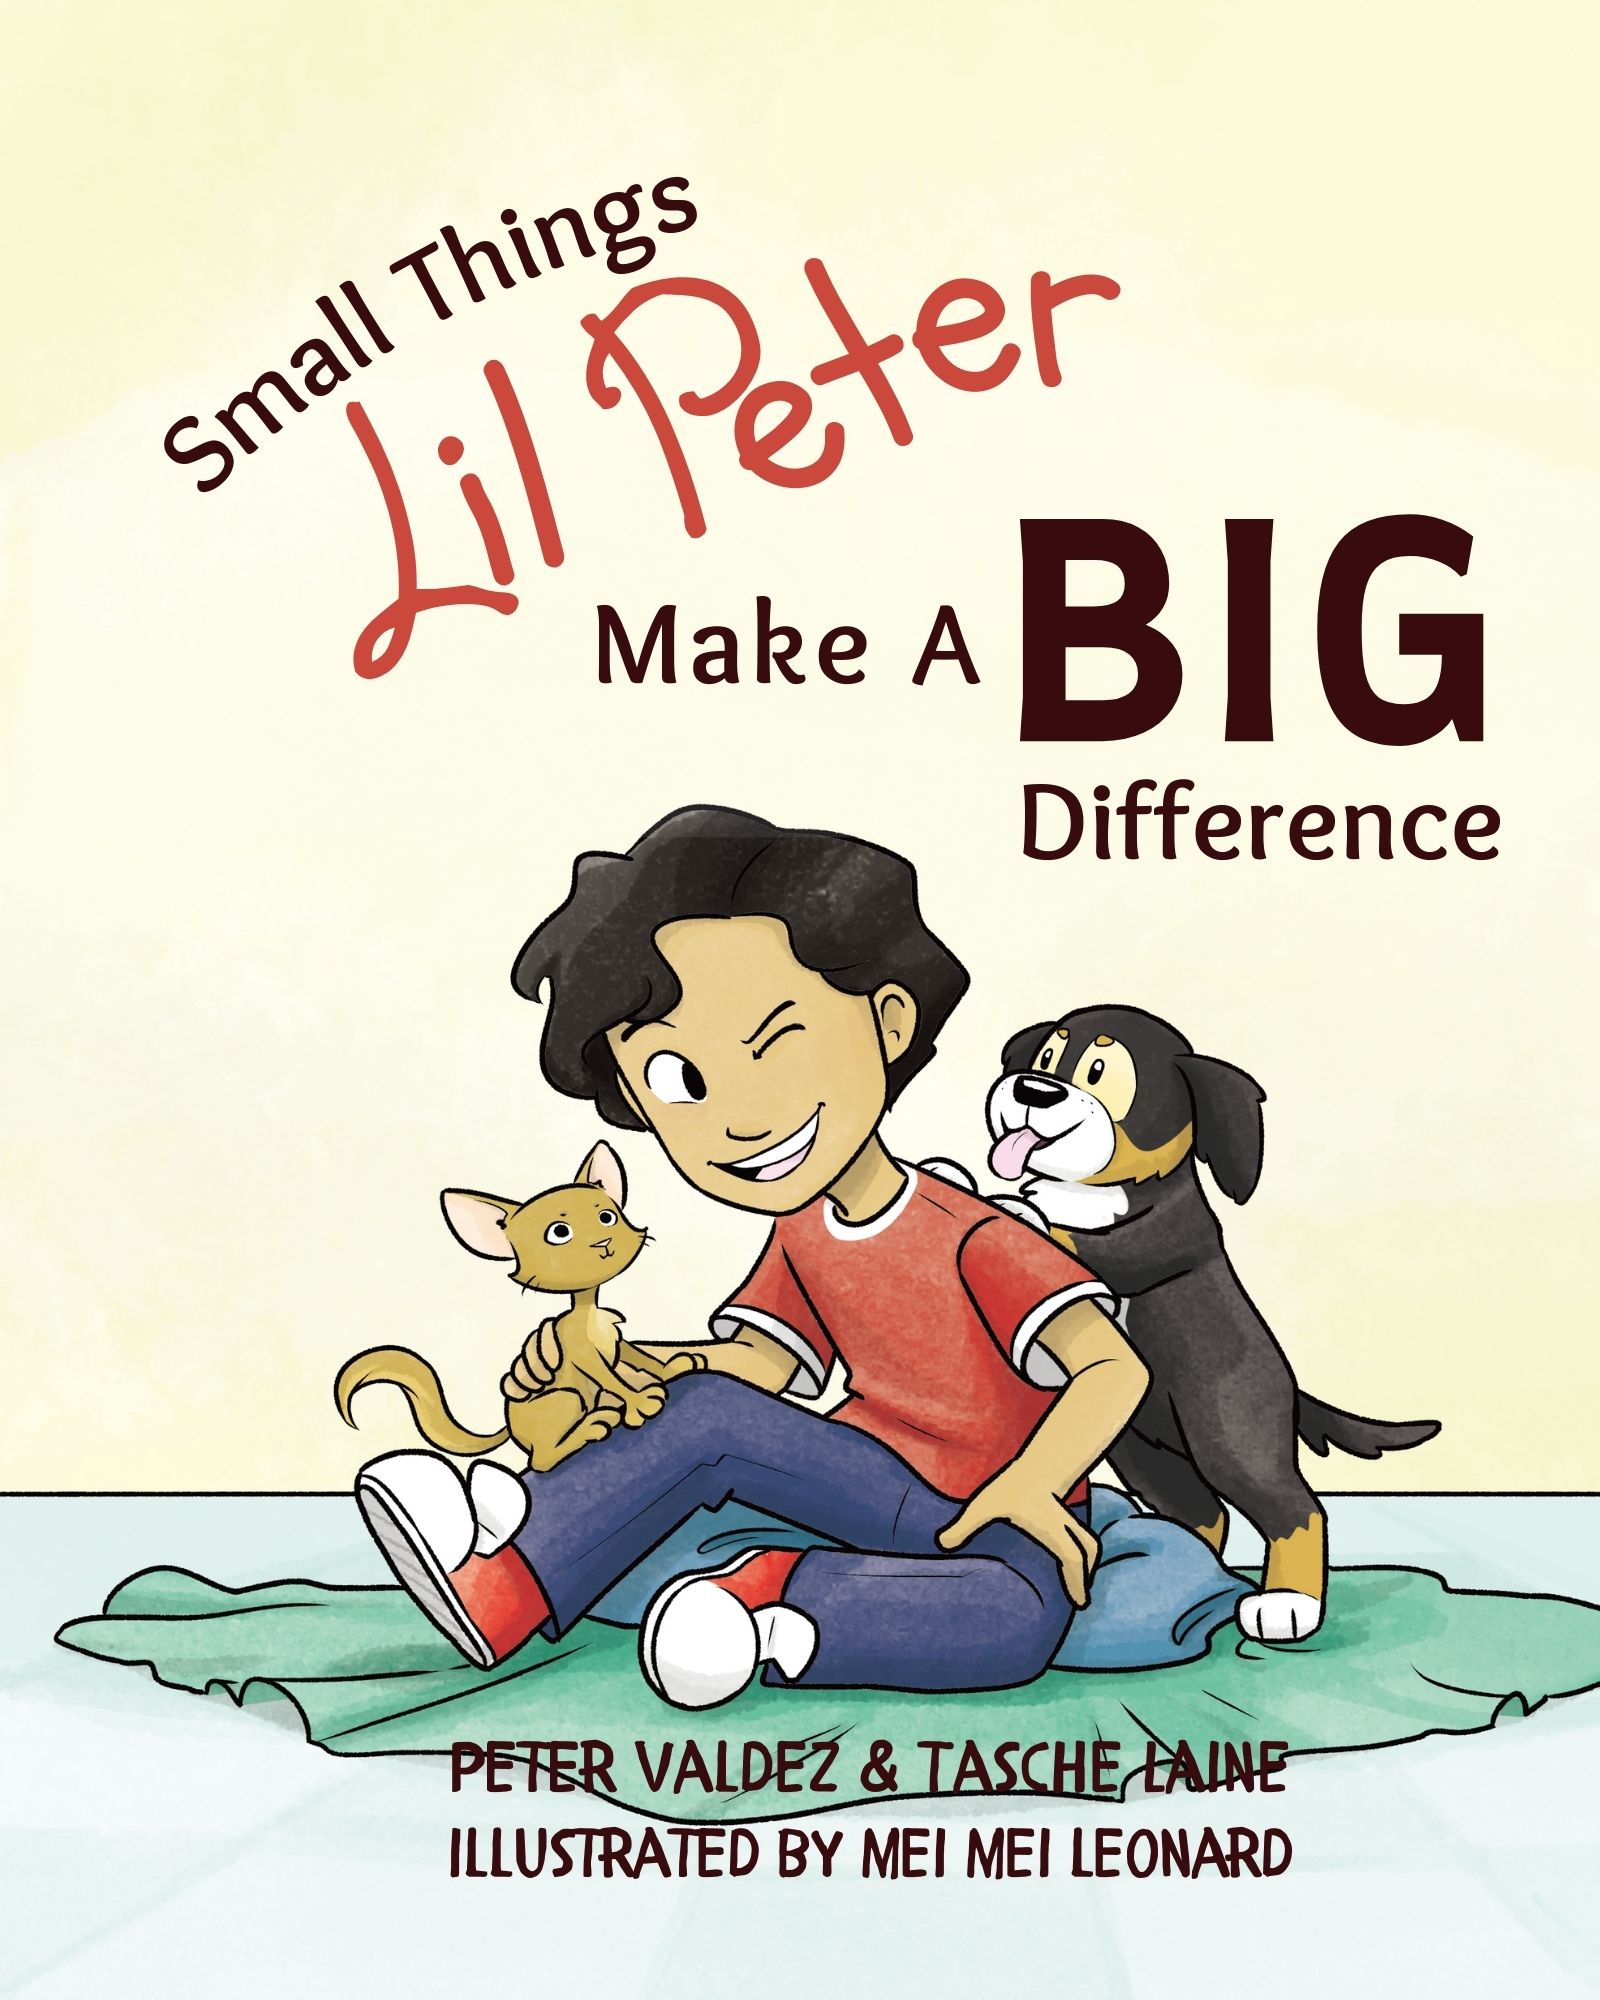 Small Things Lil Peter Make A Big Difference  Tasche Laine and Peter Valdez Book Cover